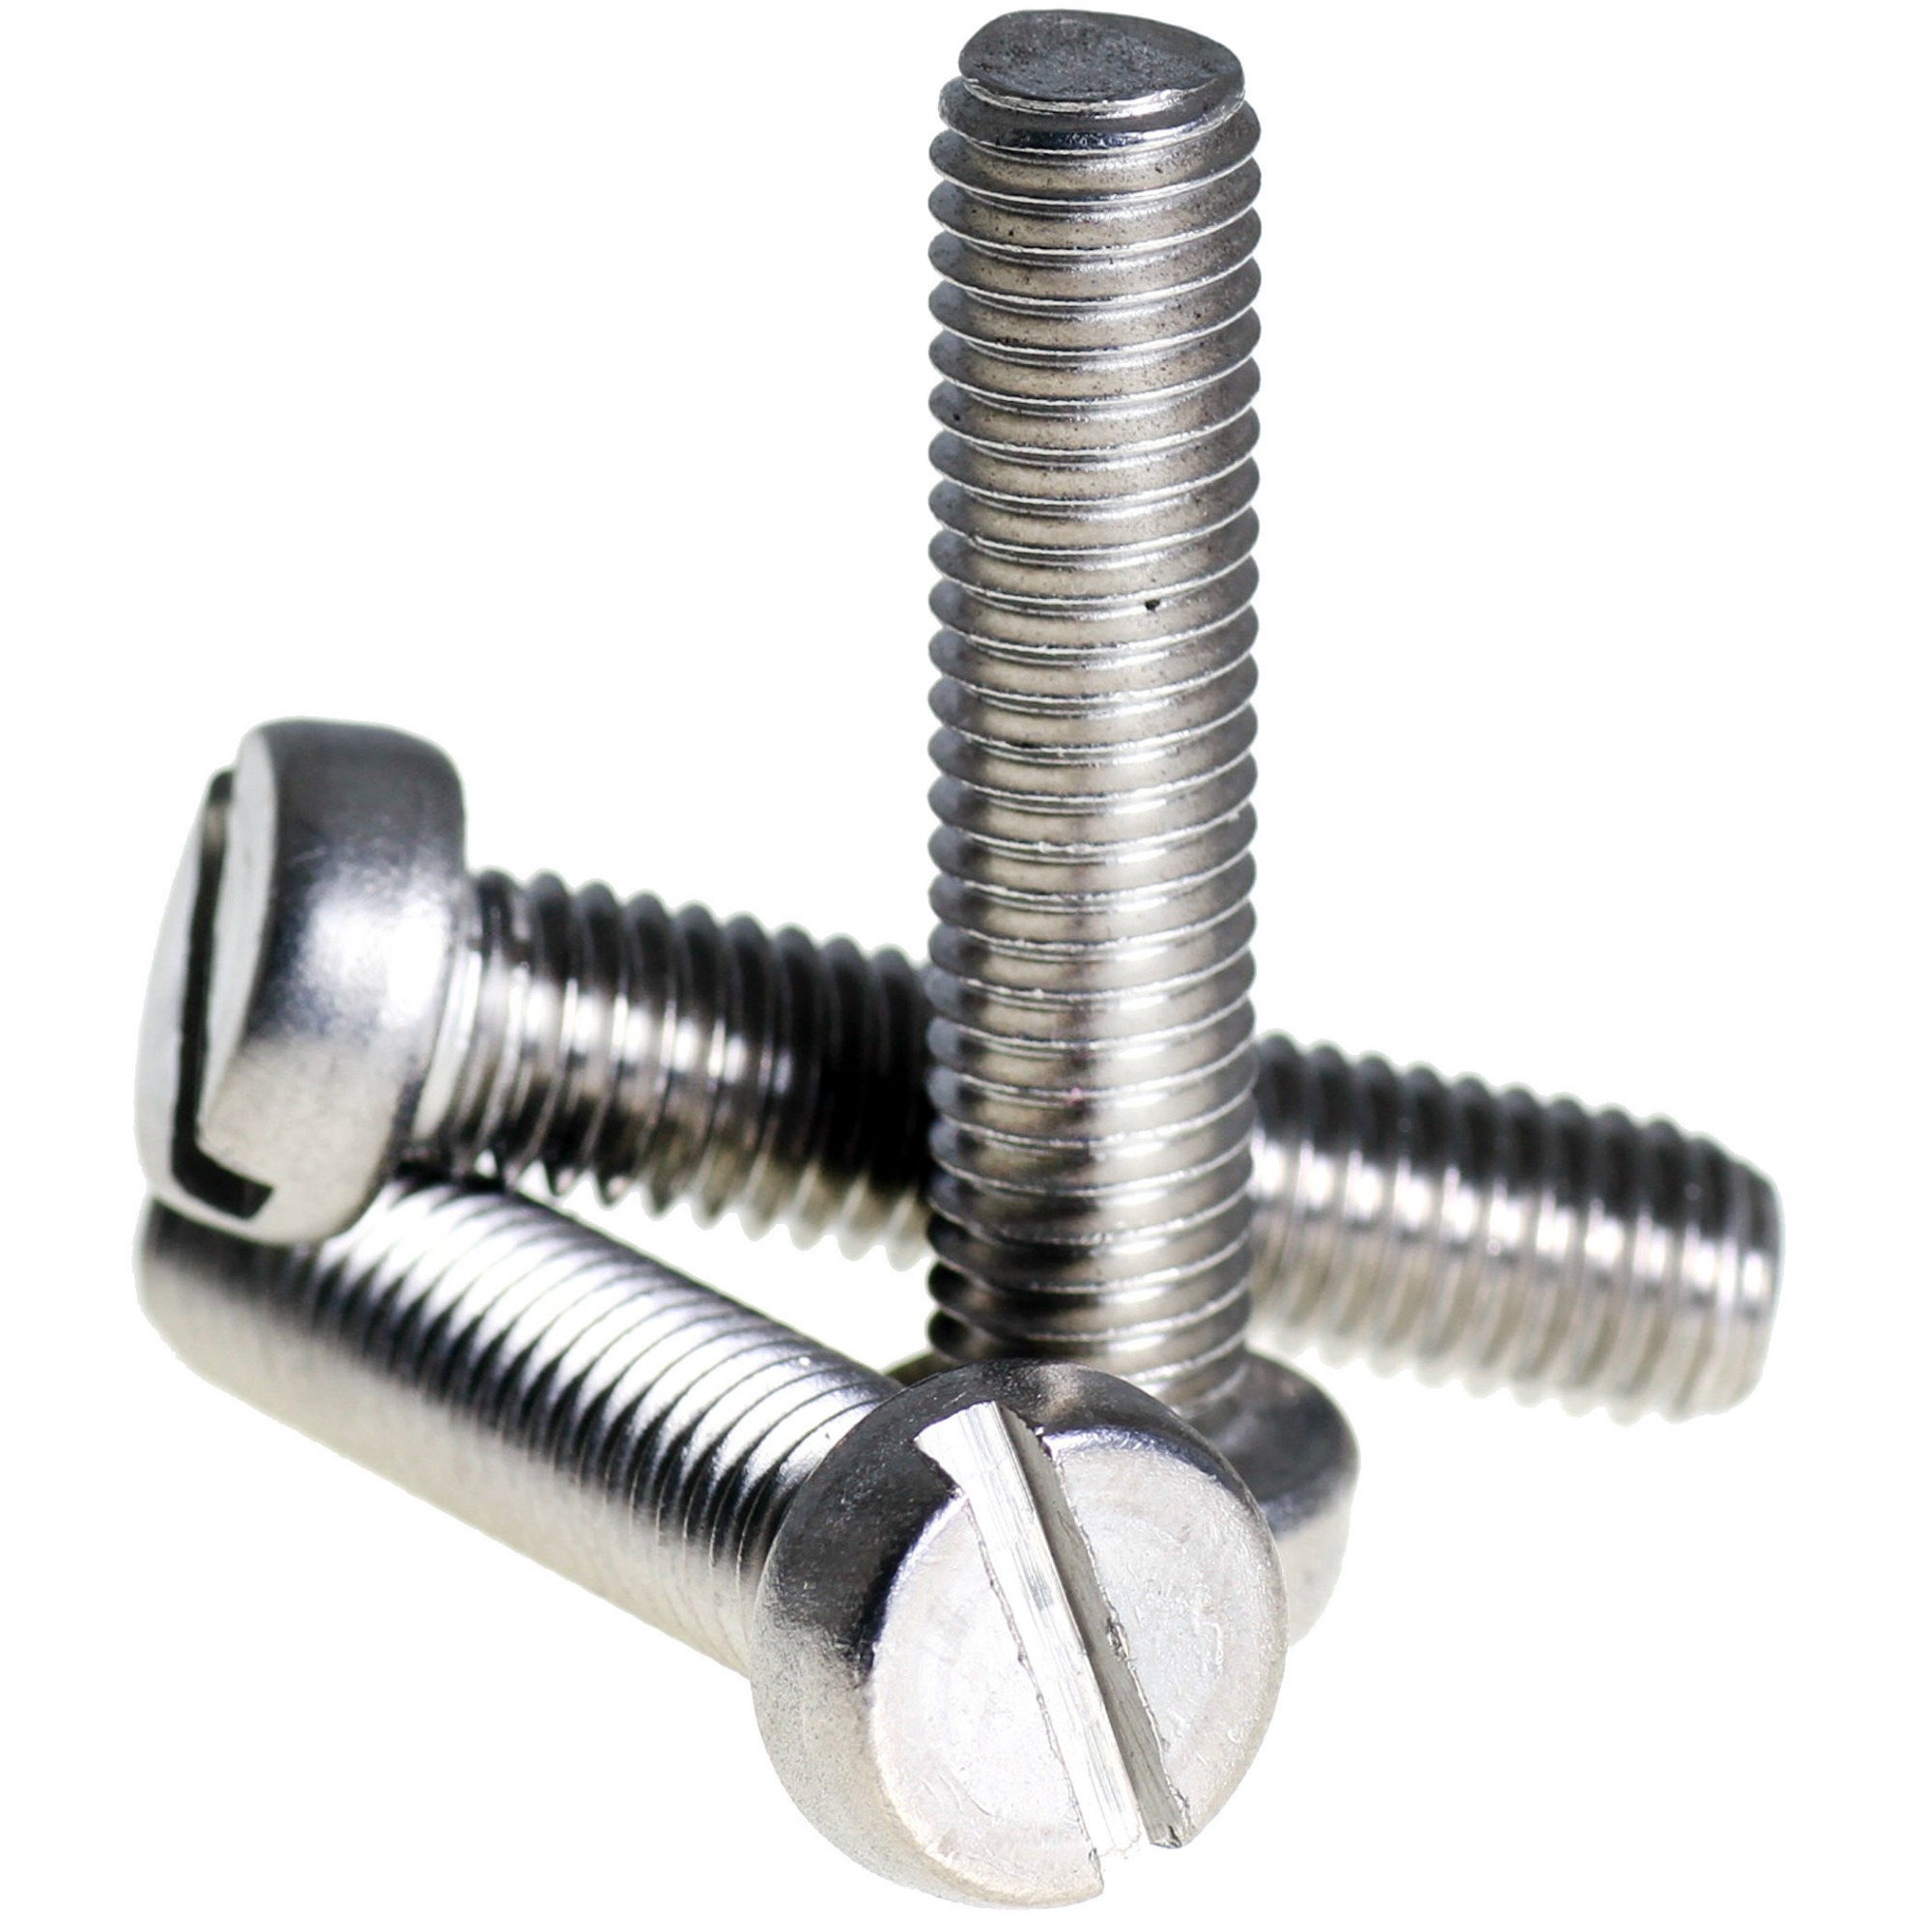 Easymech M5 X 20Mm Chhd Bolt, Nut And Washer Set